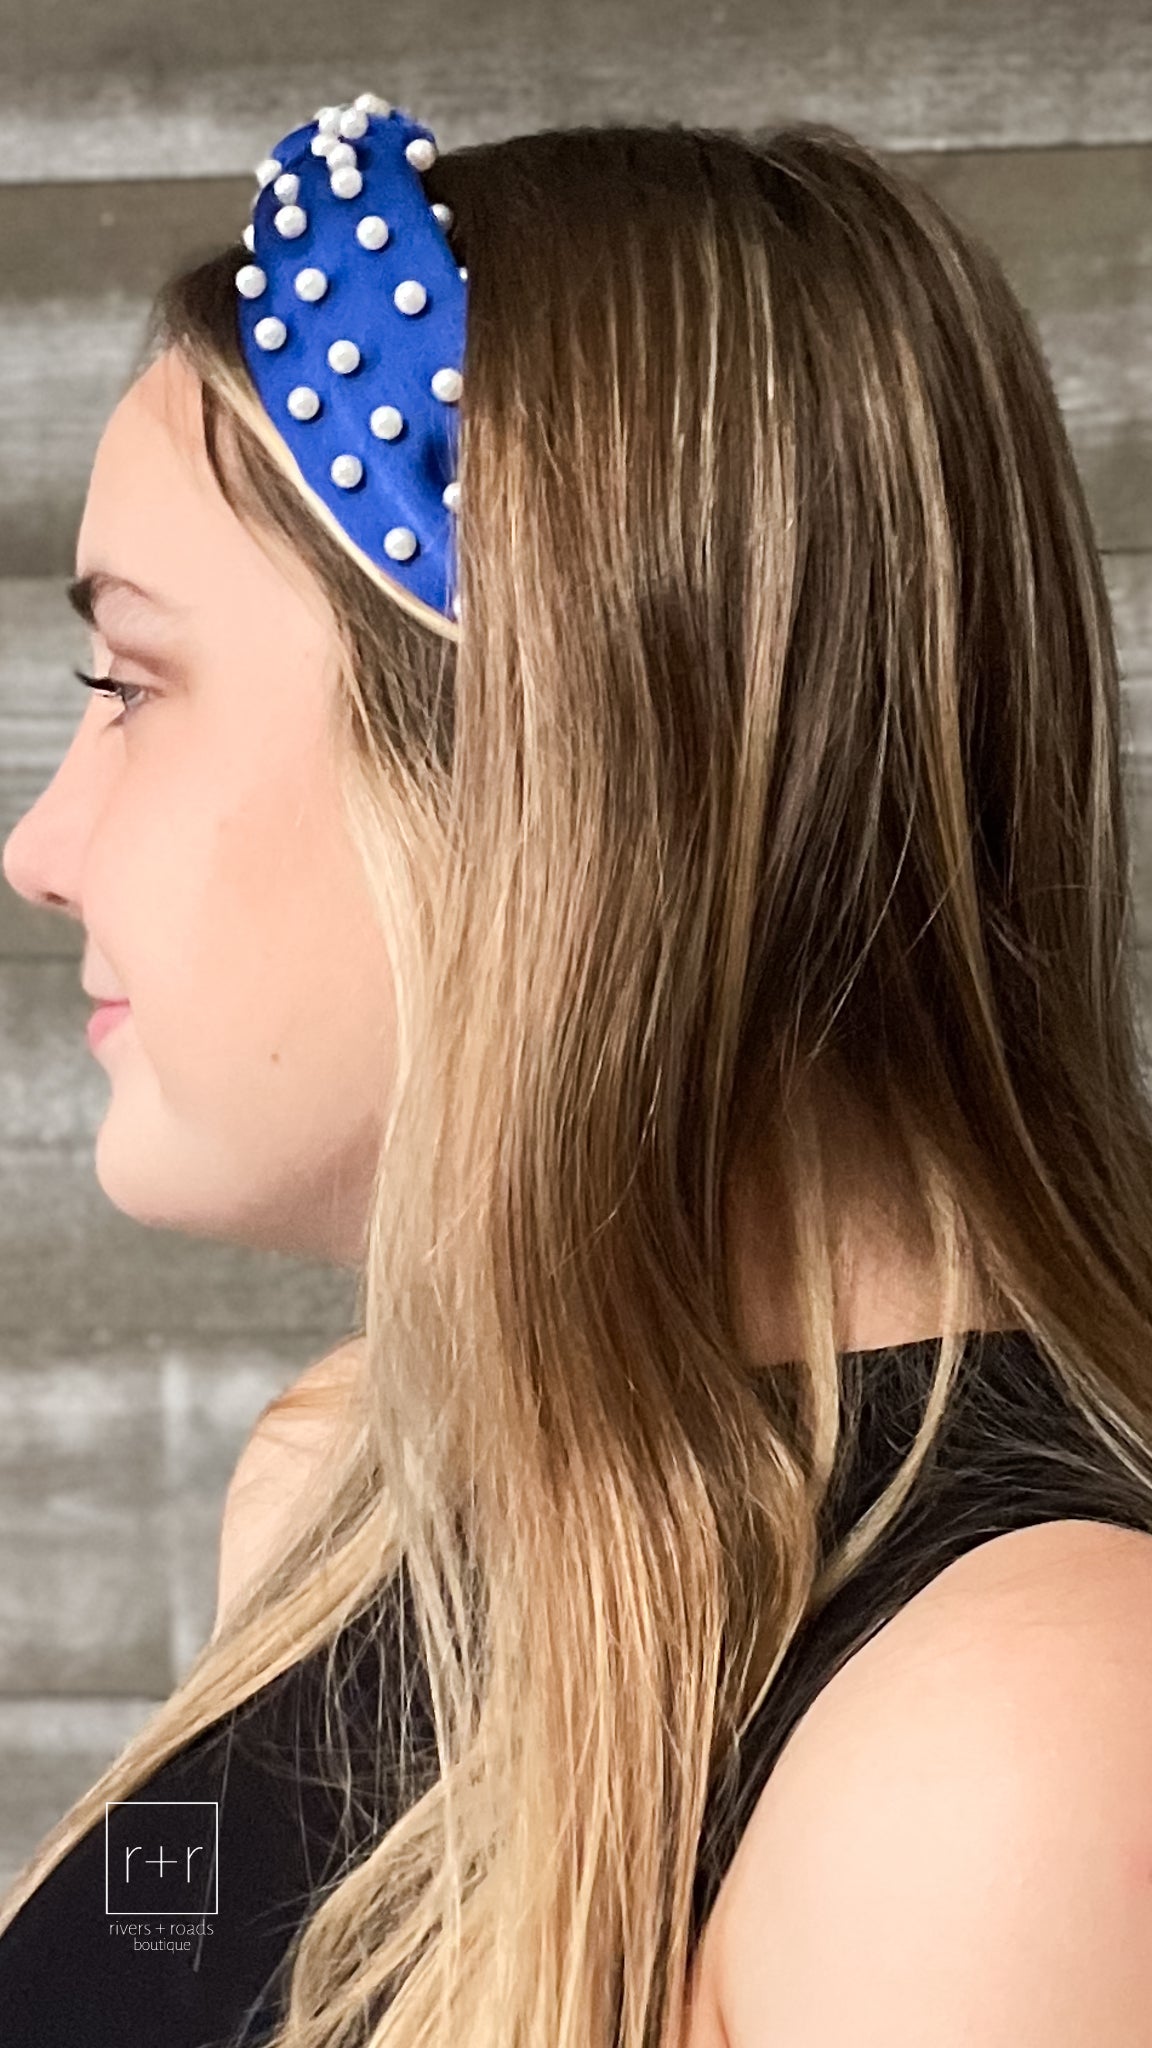 pearl studded knotted fashion headbands in royal blue